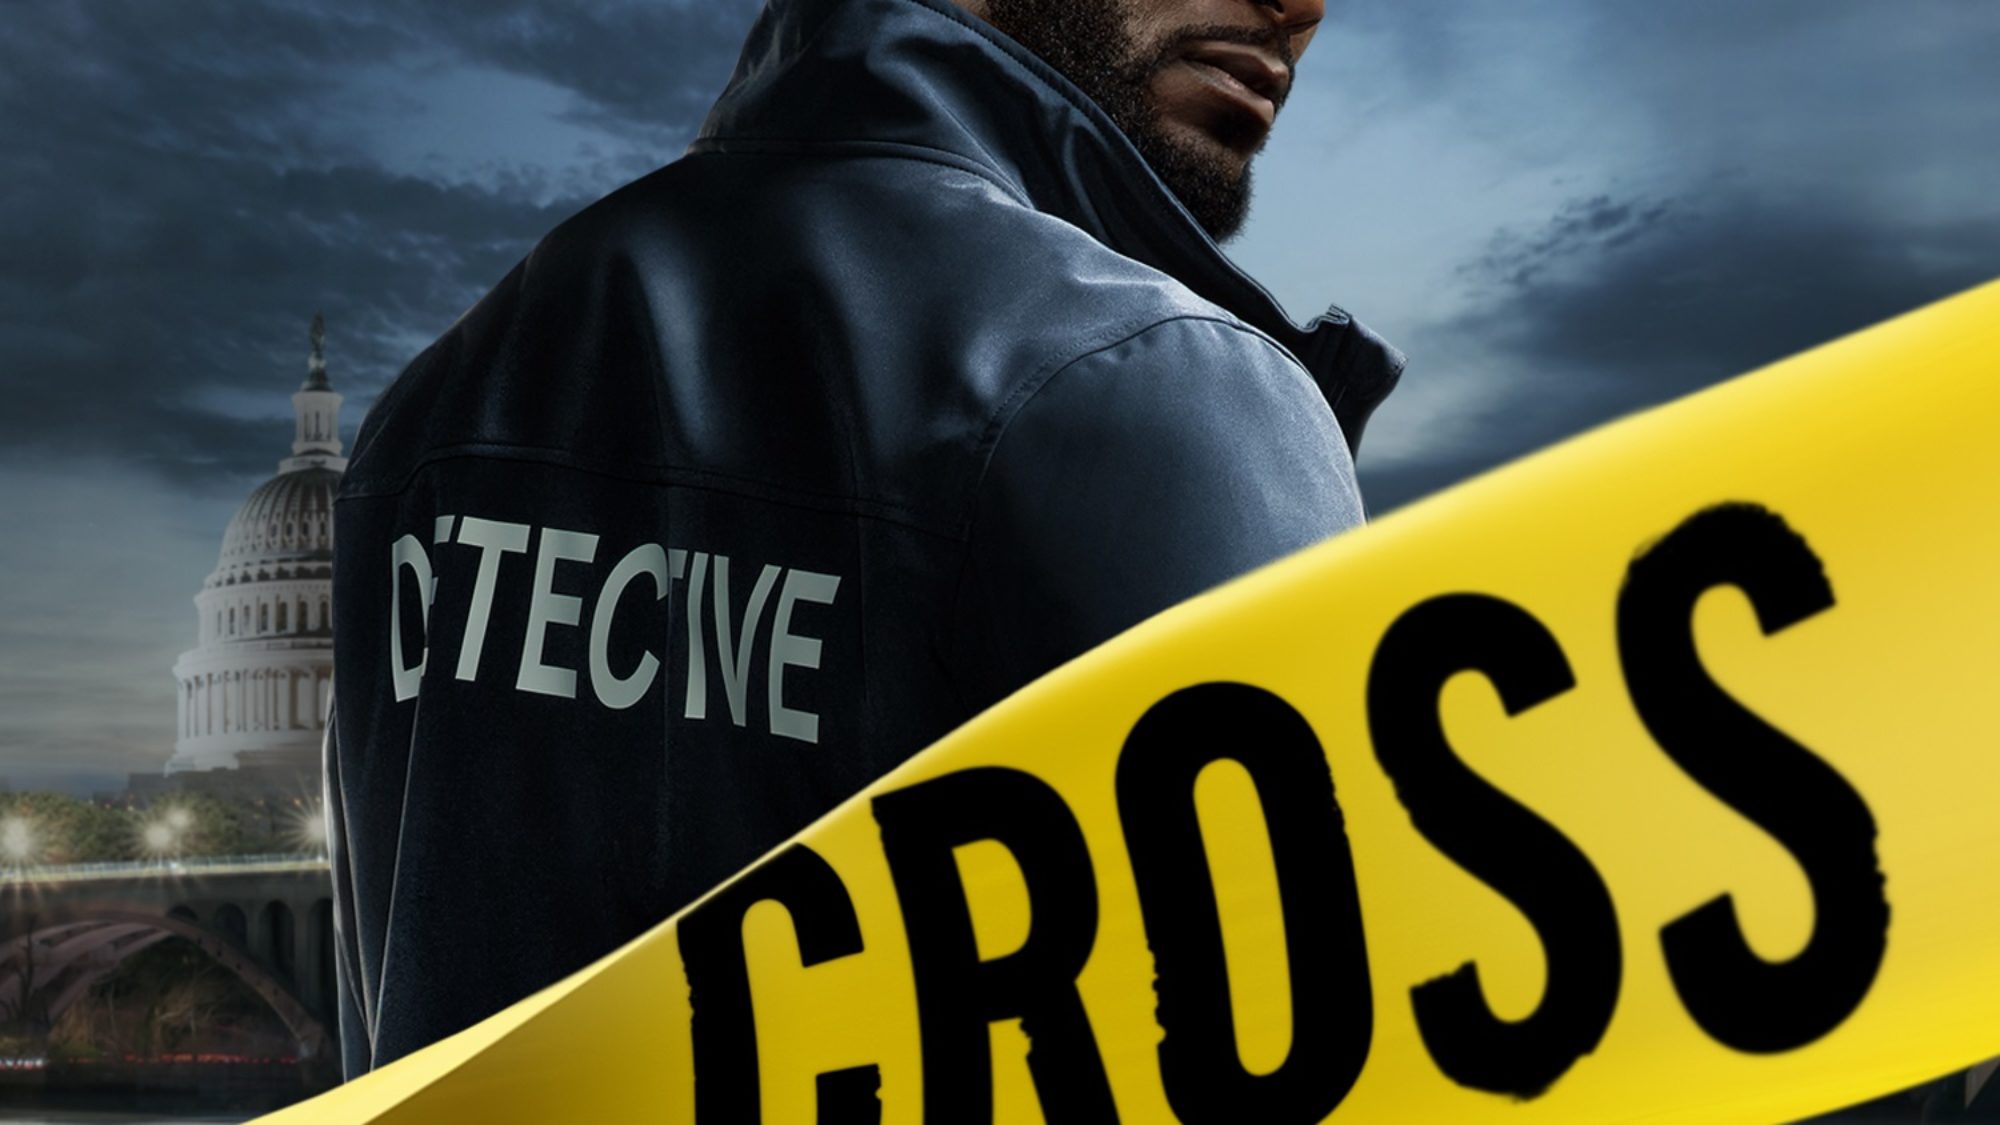 Alex Cross series directed by Aldis Hodge sets debut date on Prime Video